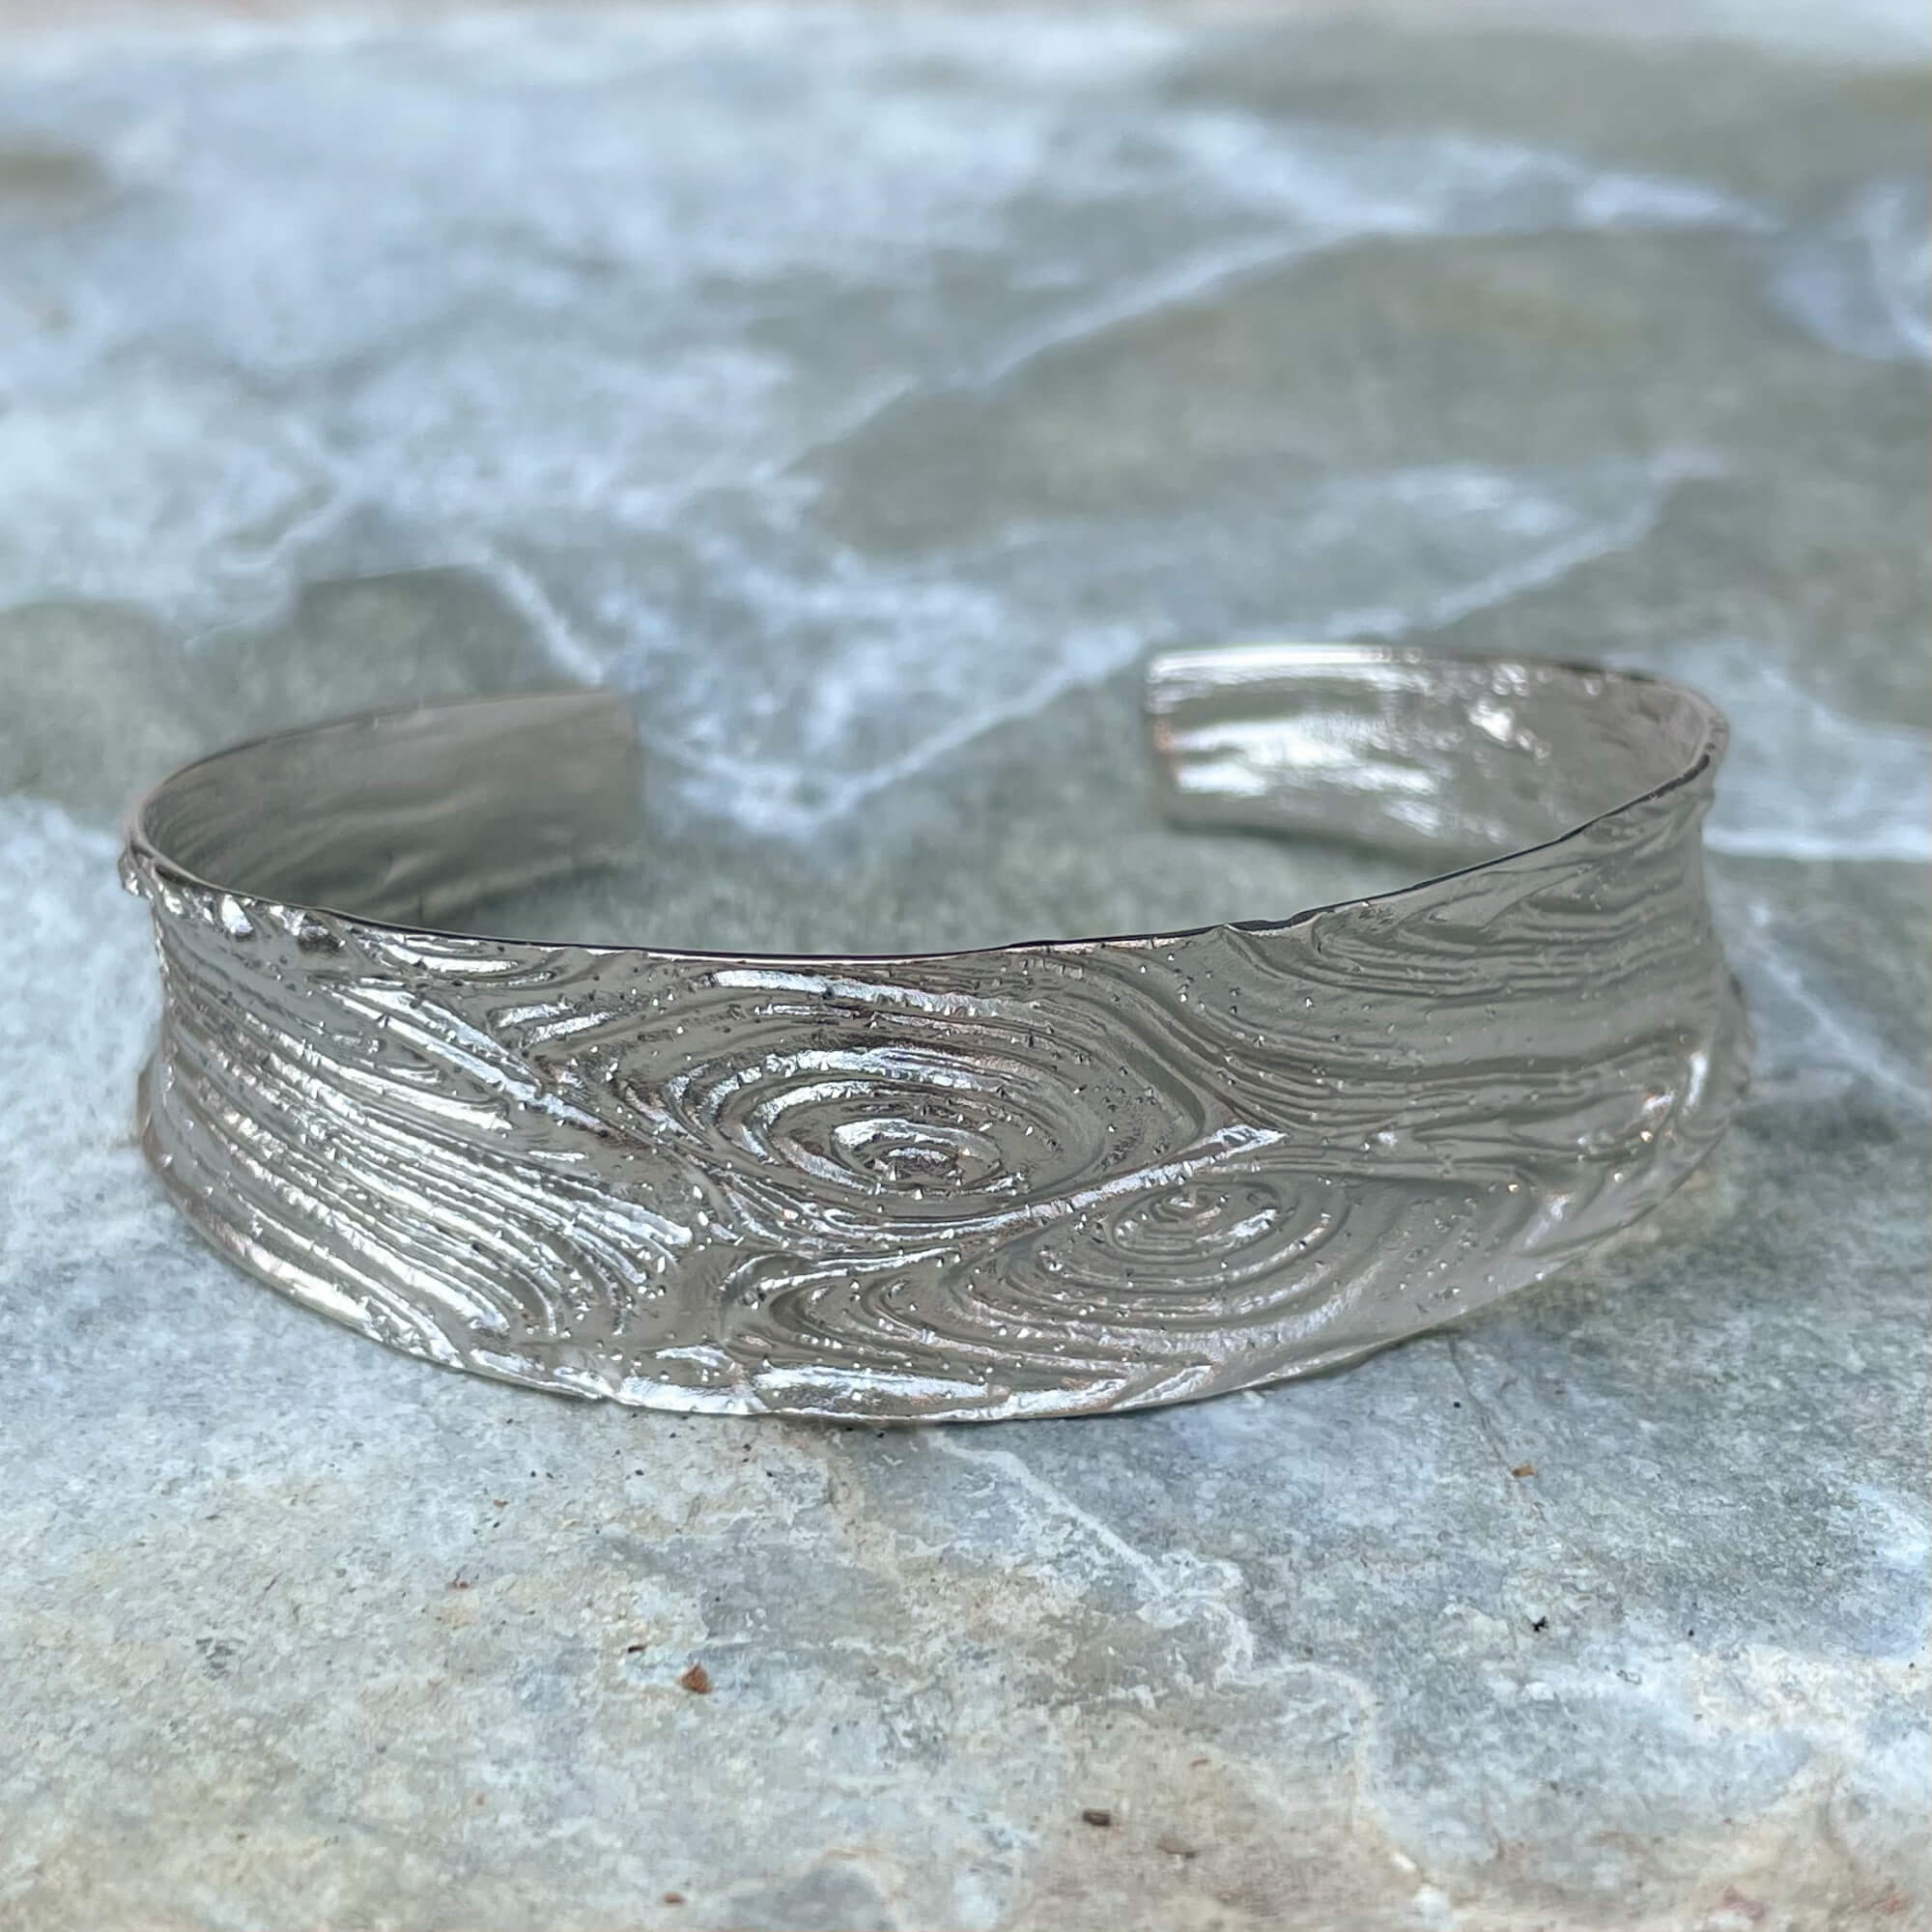 Silver and narrow machined slave bracelet